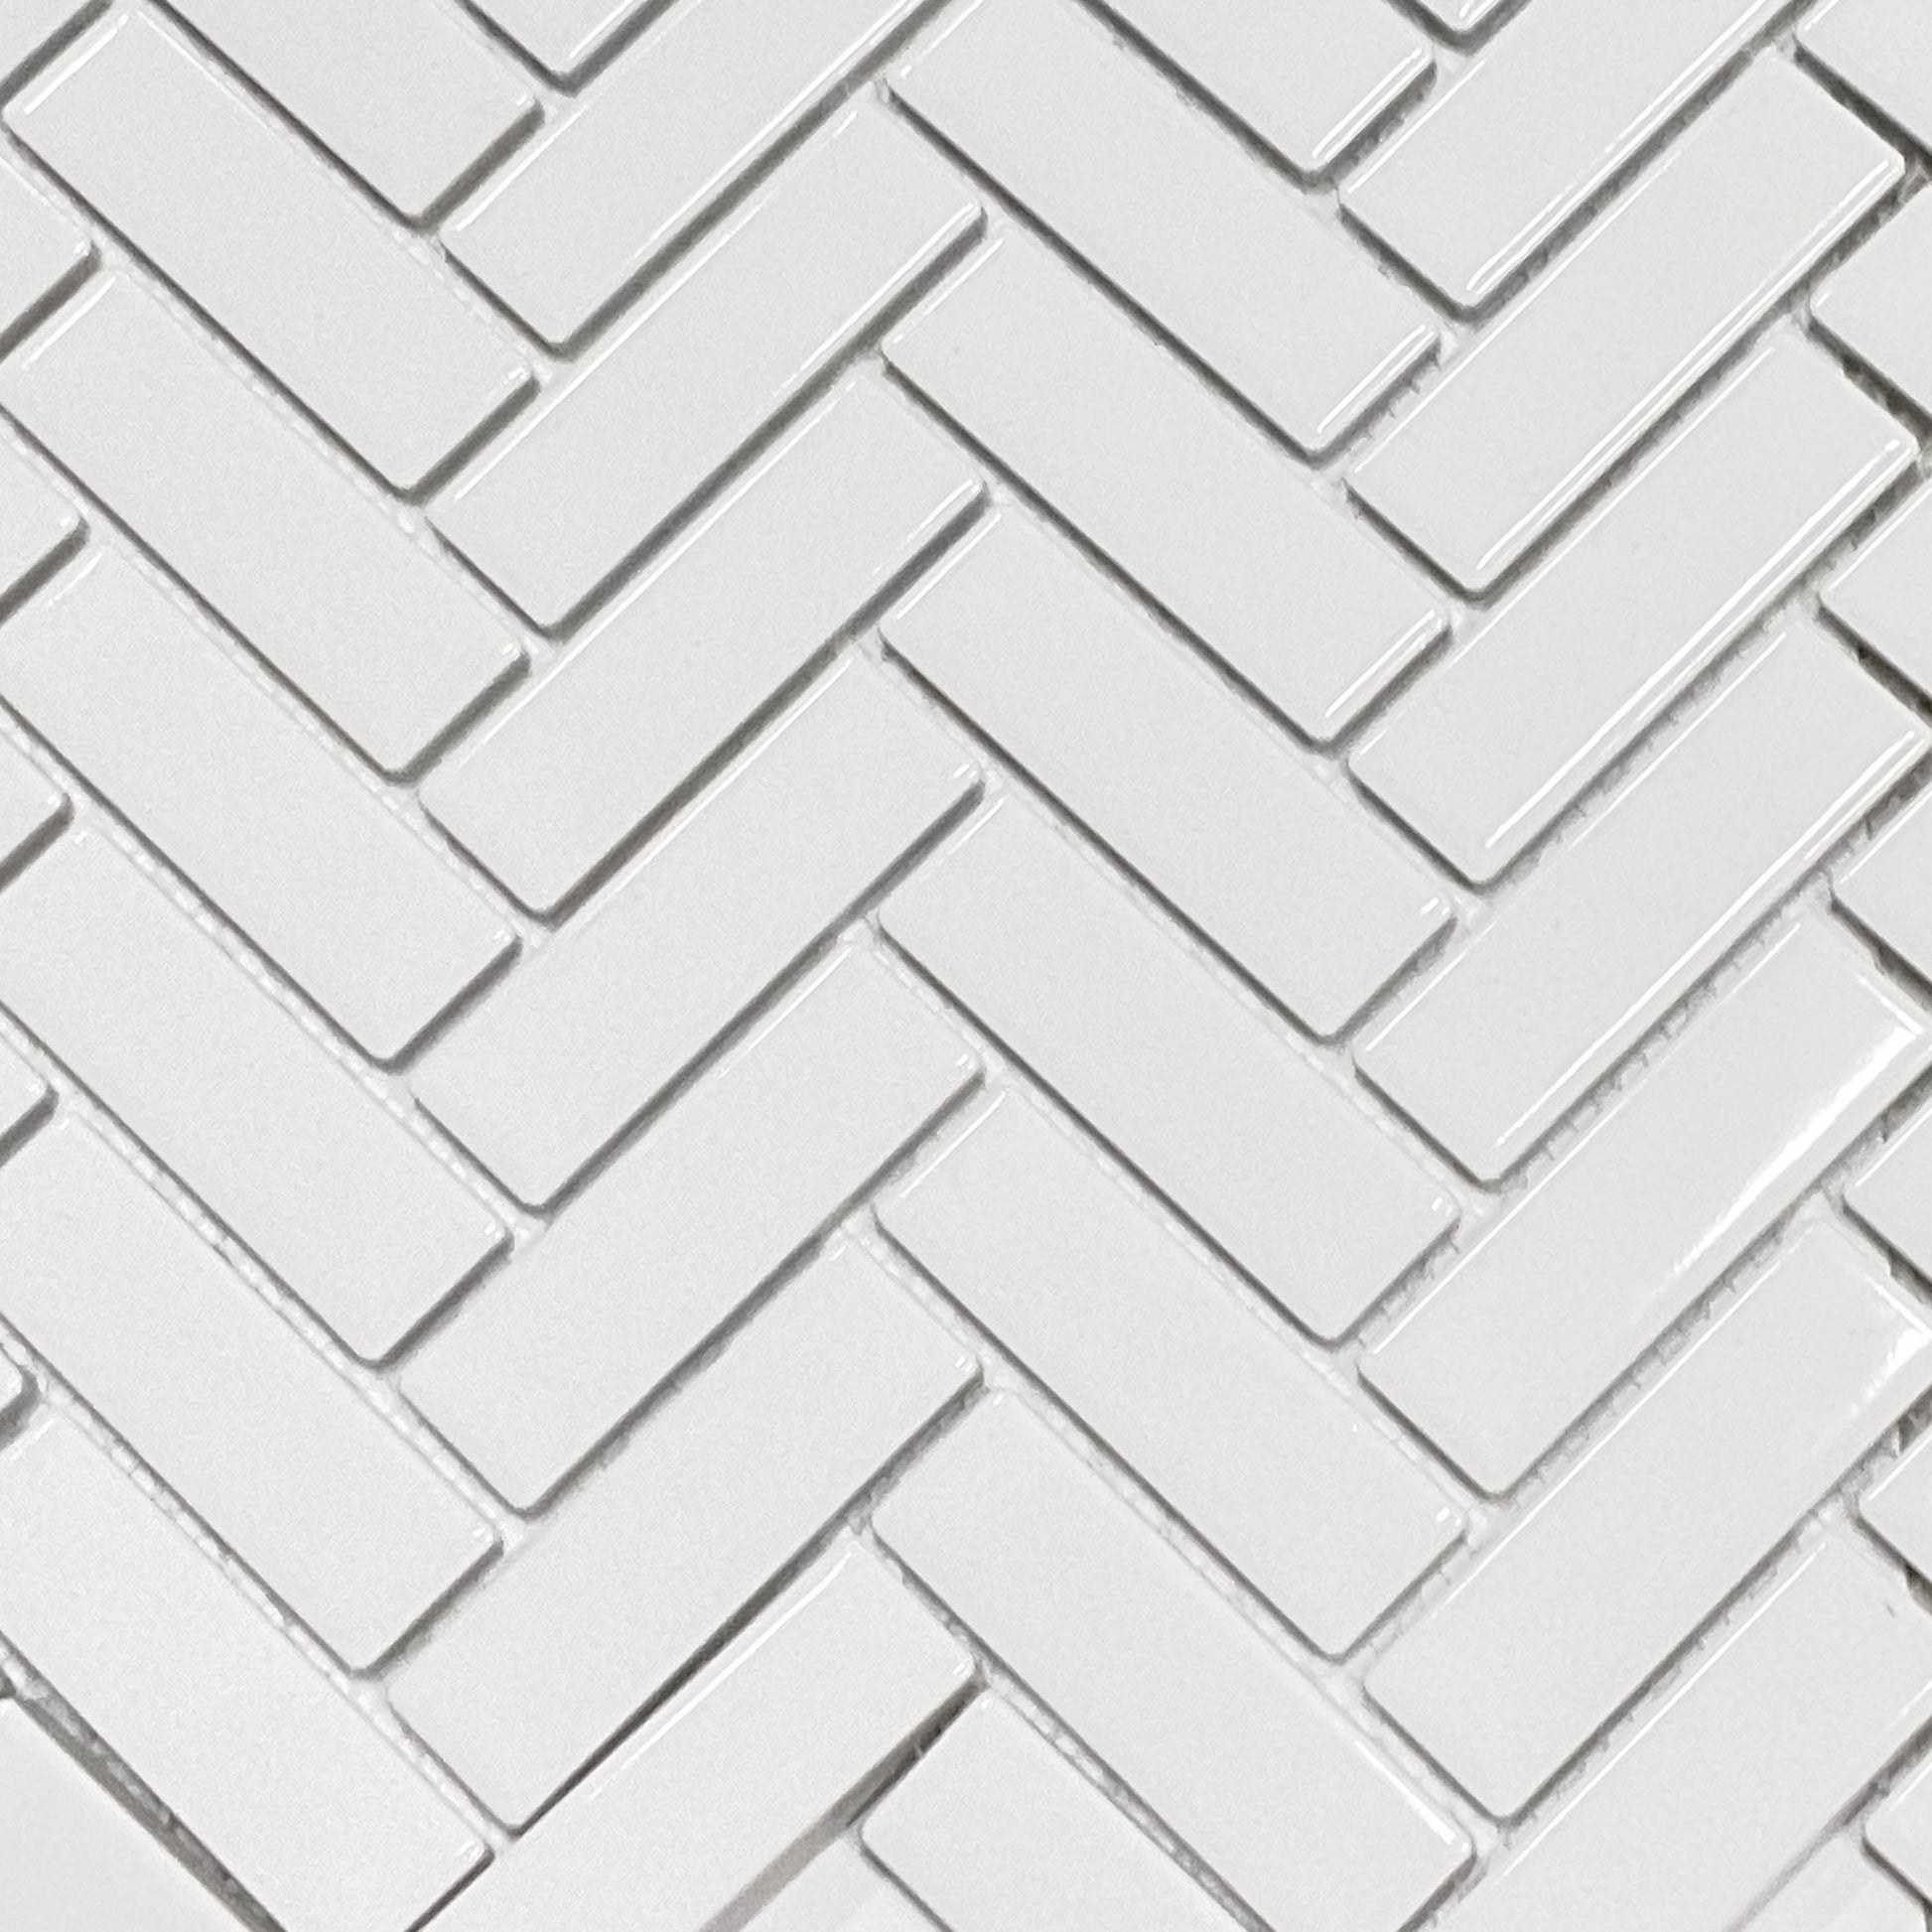 Mosaic Tile - 40115 Mosaic Tiles by KLD Home